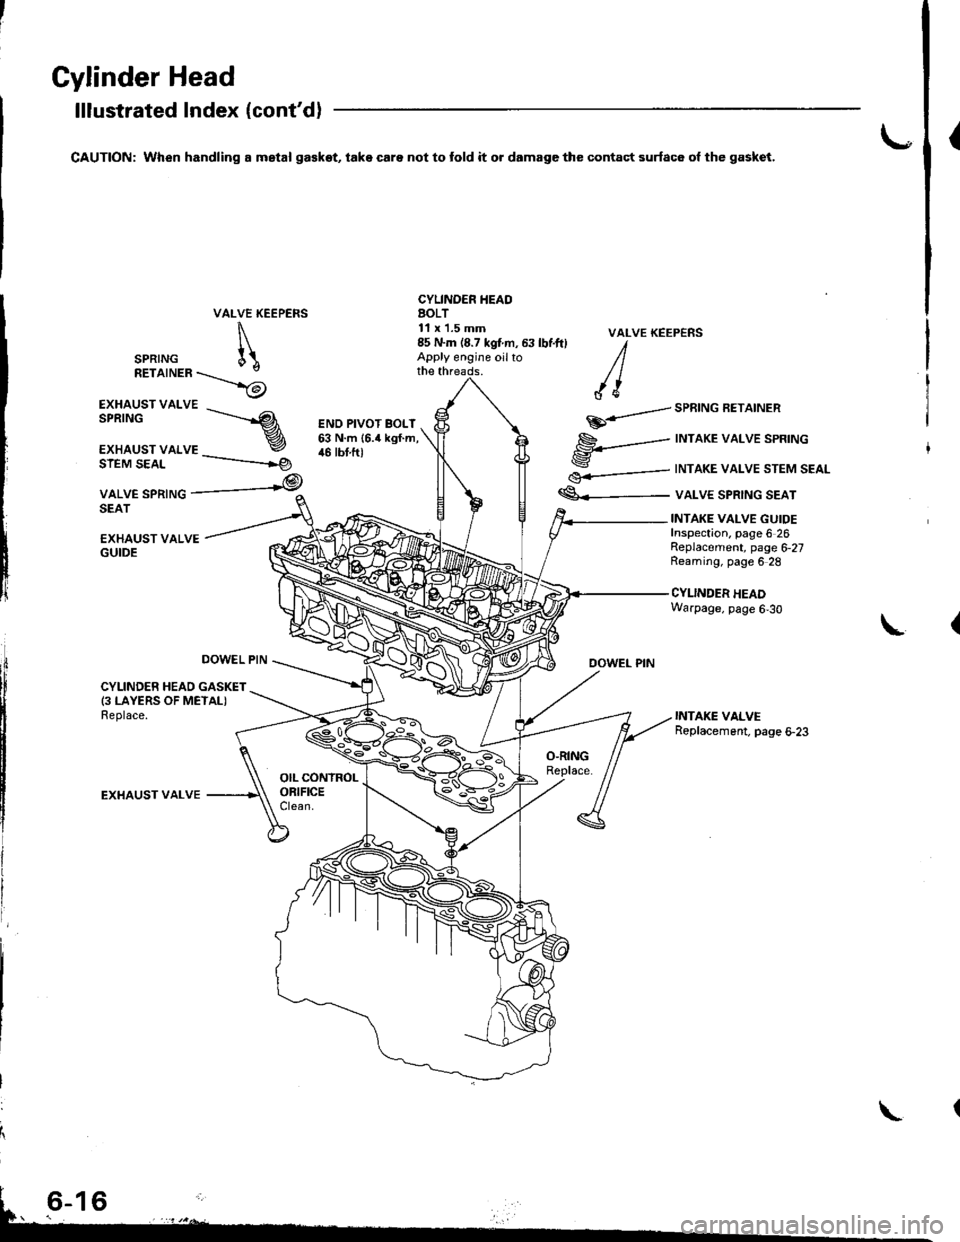 HONDA INTEGRA 1998 4.G Manual PDF Gylinder Head
lllustrated Index (contd)
CAUTION: When handling a mstal ga€kot, take care not to fold it o. damage the contact surfac6 ol the gasket.{
VALVE KEEPERS
\
SPRTNG [\RETaTNER\_>6
CYLINDER 